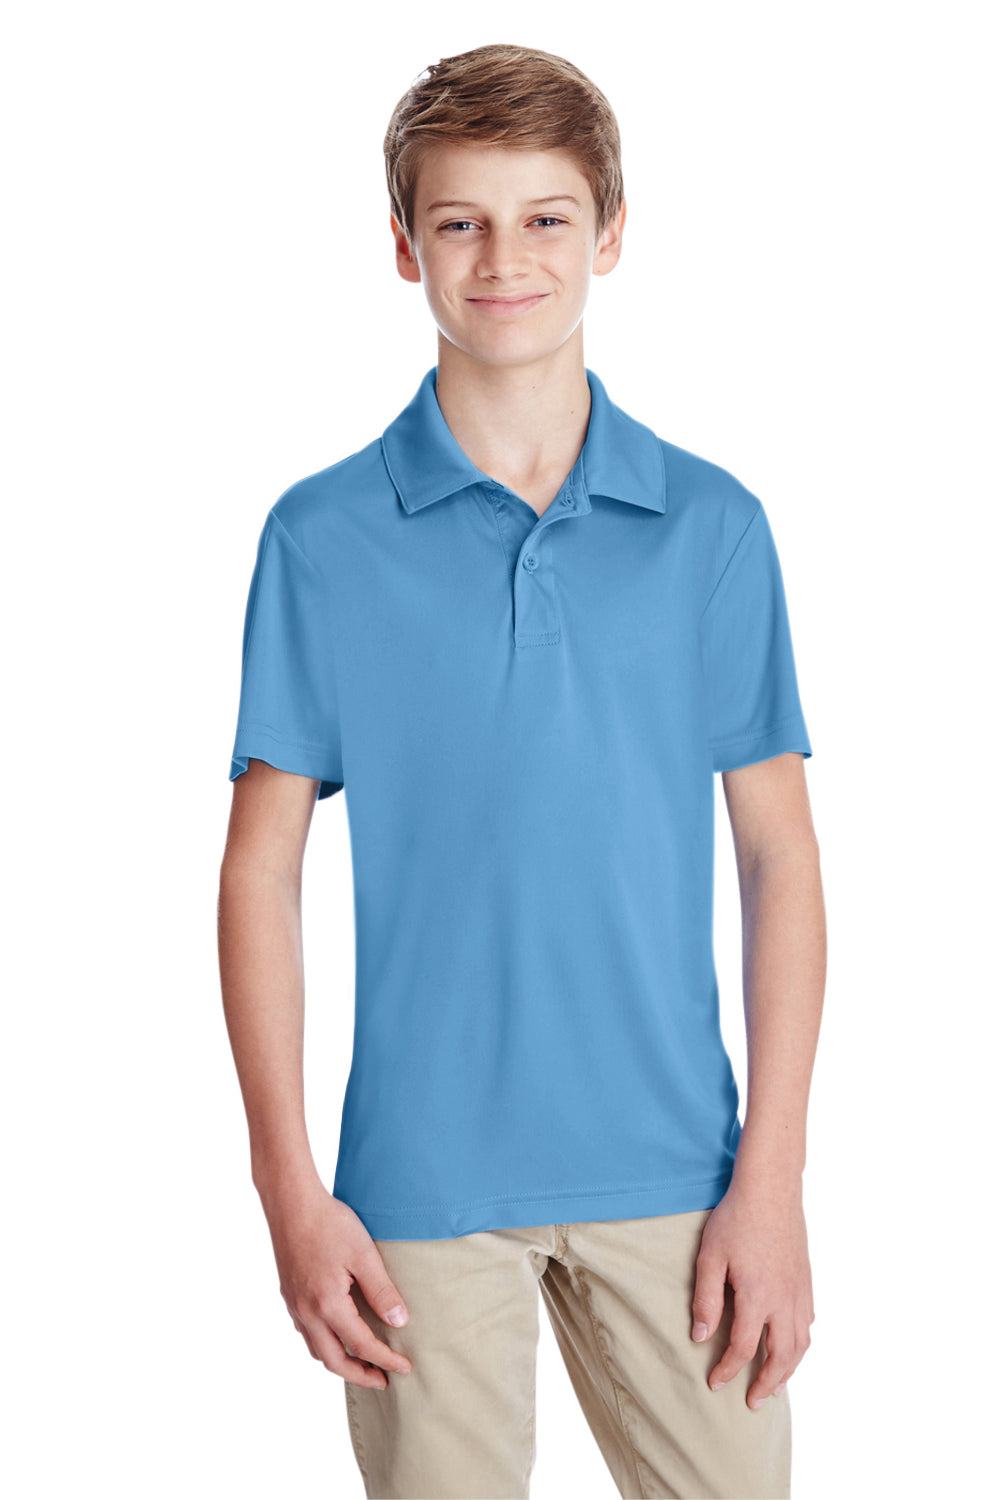 Team 365 TT51Y Youth Zone Performance Moisture Wicking Short Sleeve Polo Shirt Light Blue Front